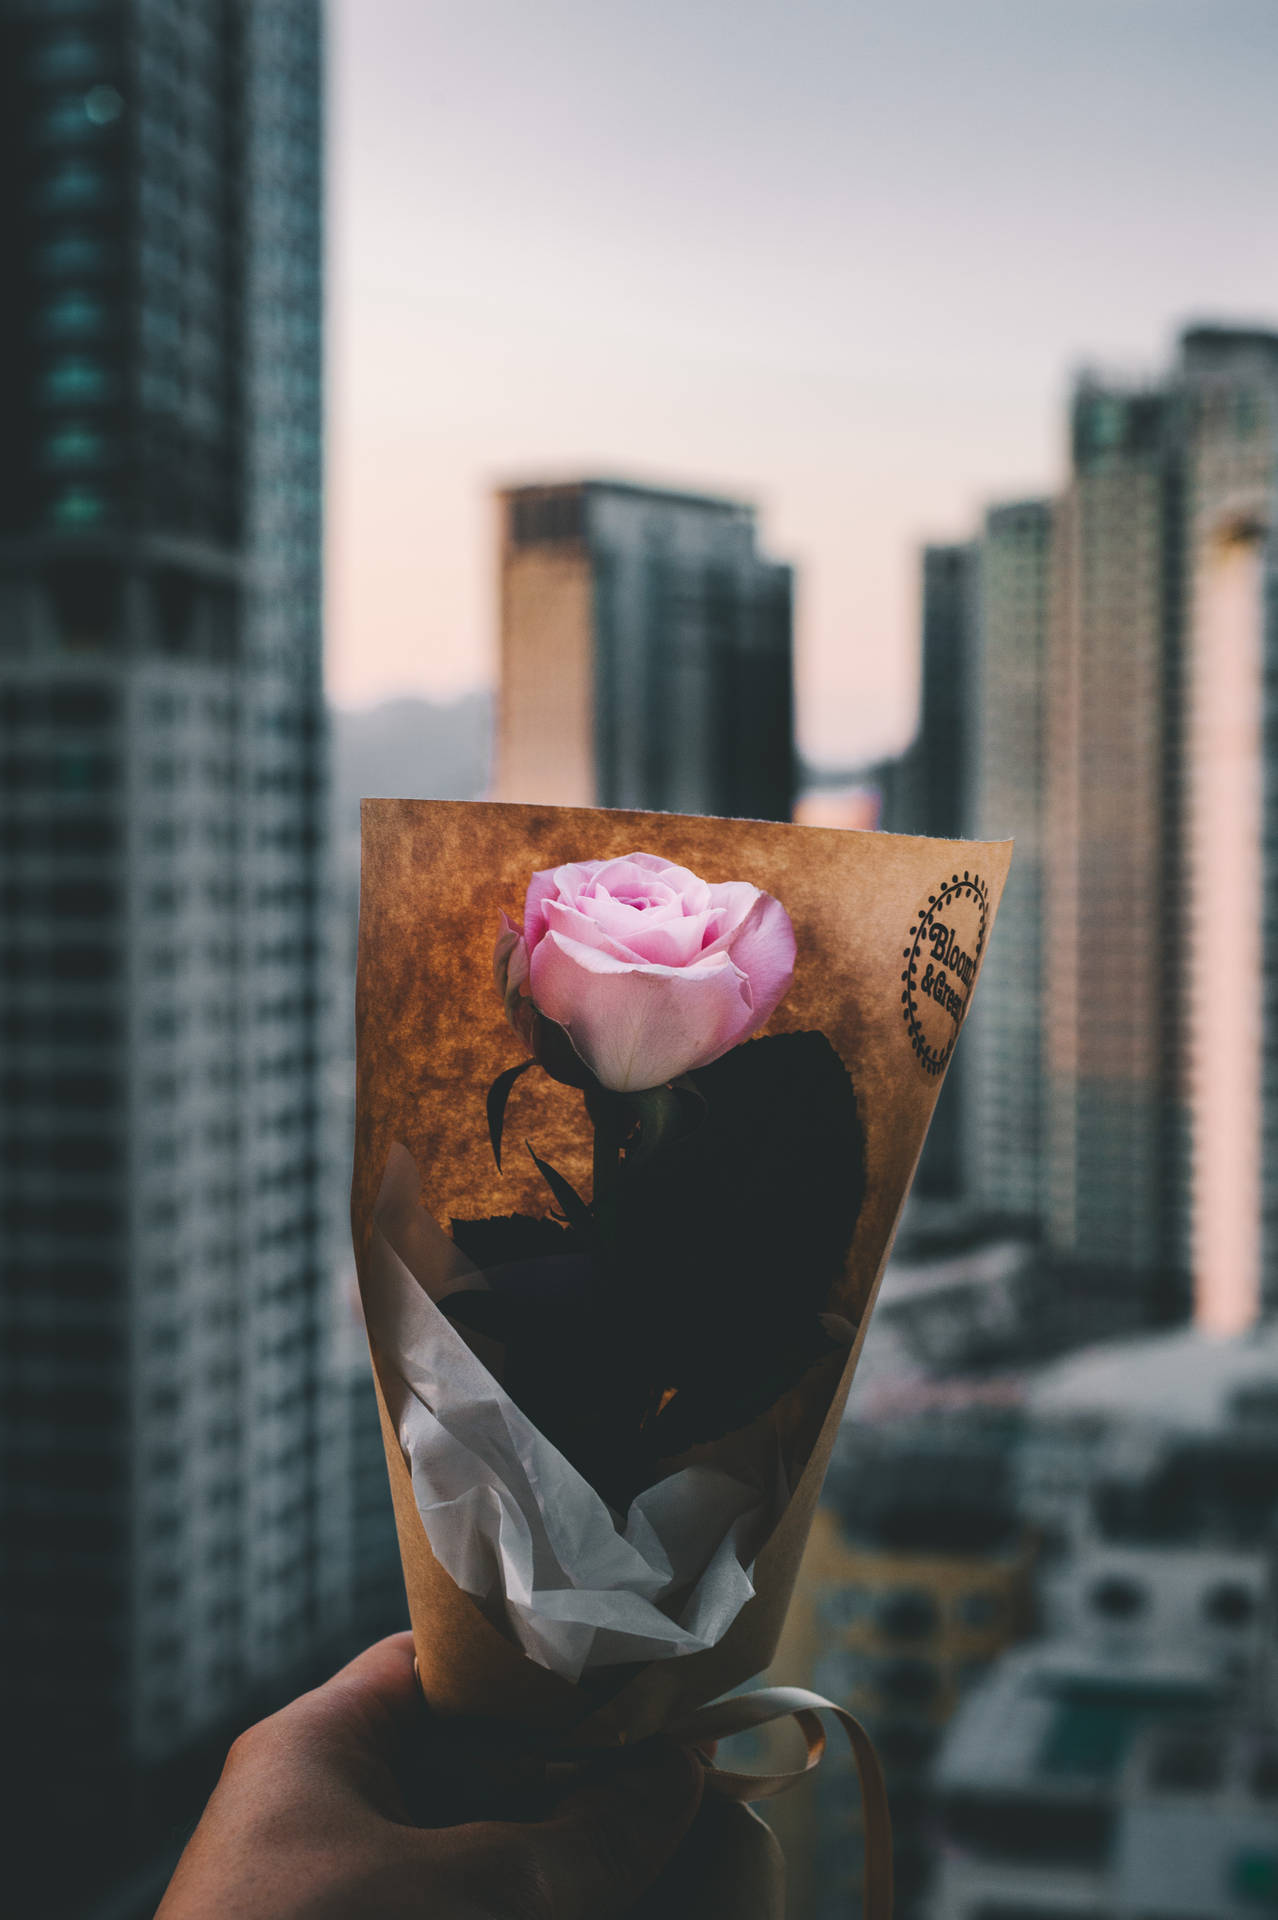 Romantic Love Flowers And City View Wallpaper